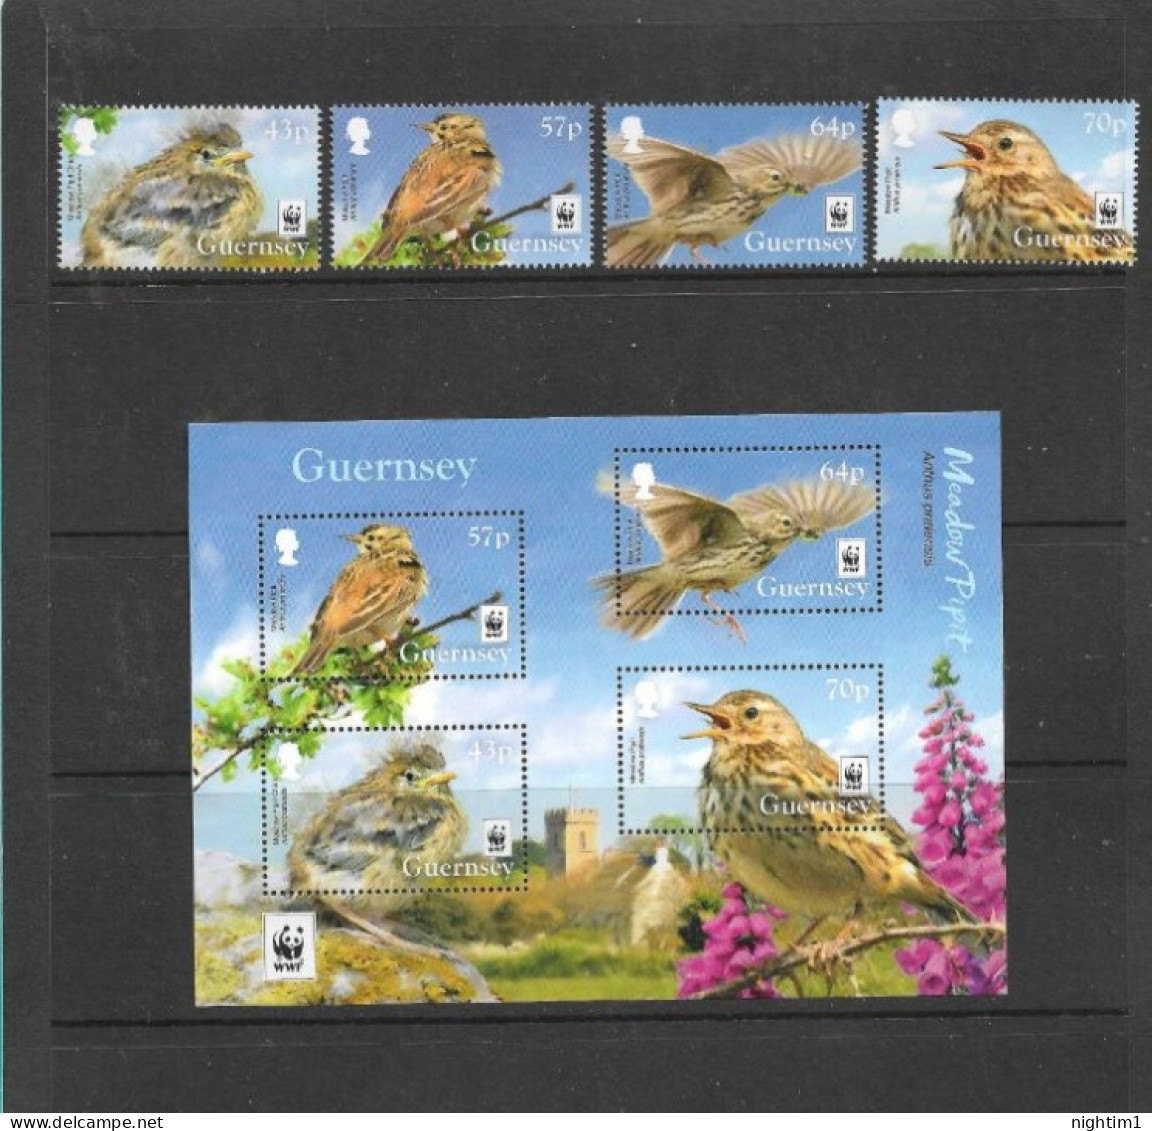 GUERNSEY COLLECTION.  MEADOW PIPIT. SET OF 4 AND MINIATURE SHEET. UNMOUNTED MINT. - Guernsey